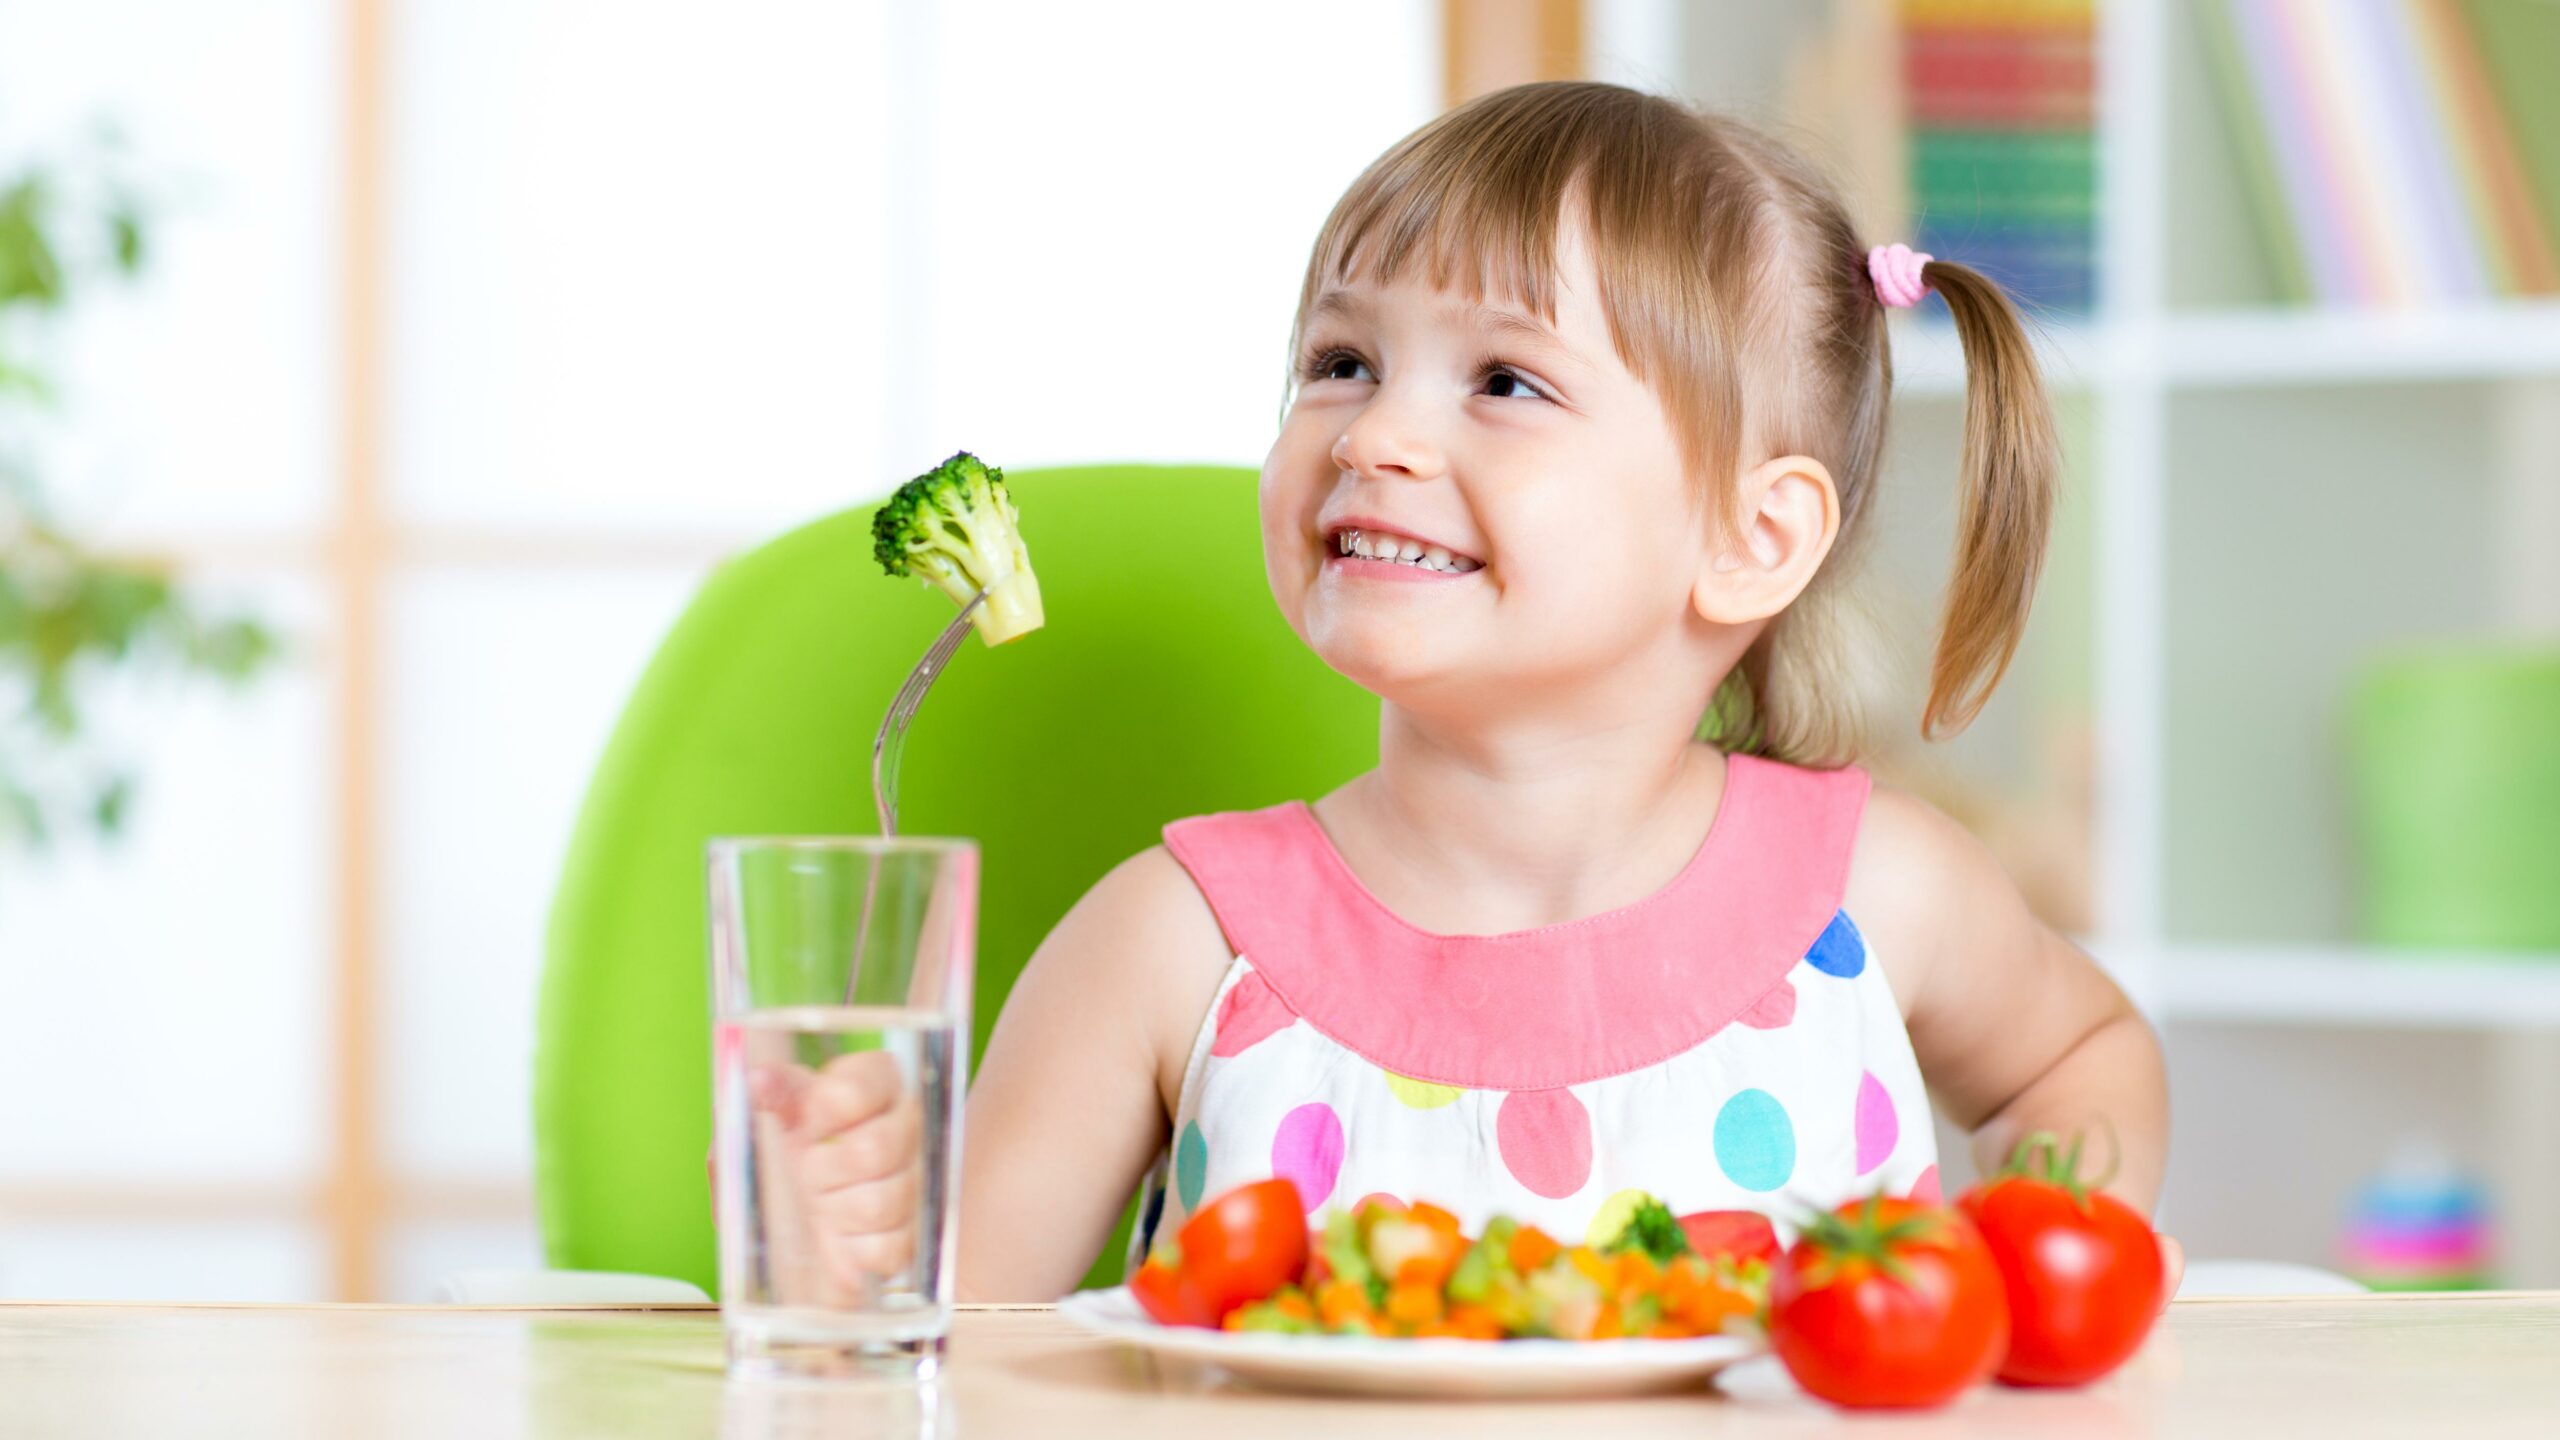 Child Is Not A Picky Eater